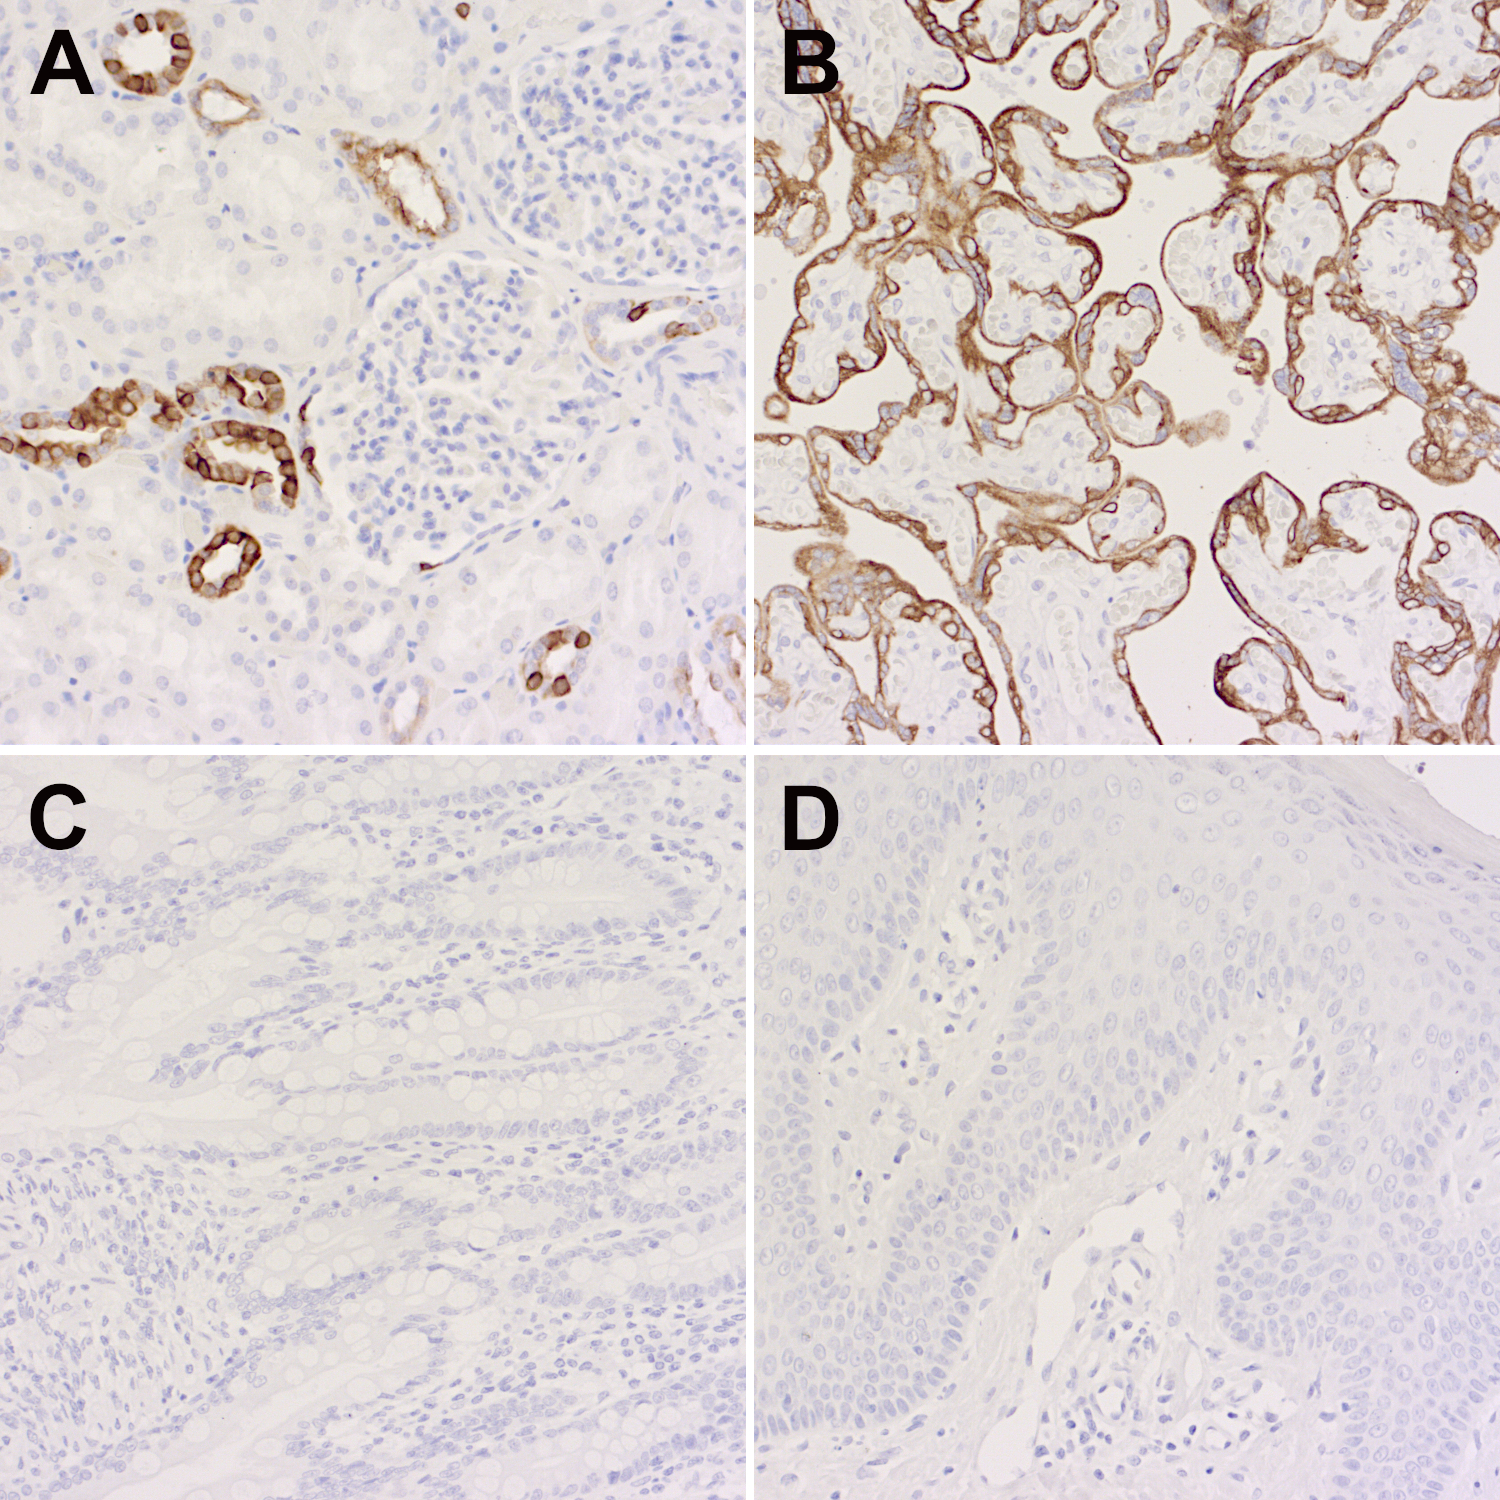 Immunohistochemical staining of formalin-fixed paraffin-embedded (FFPE) sections